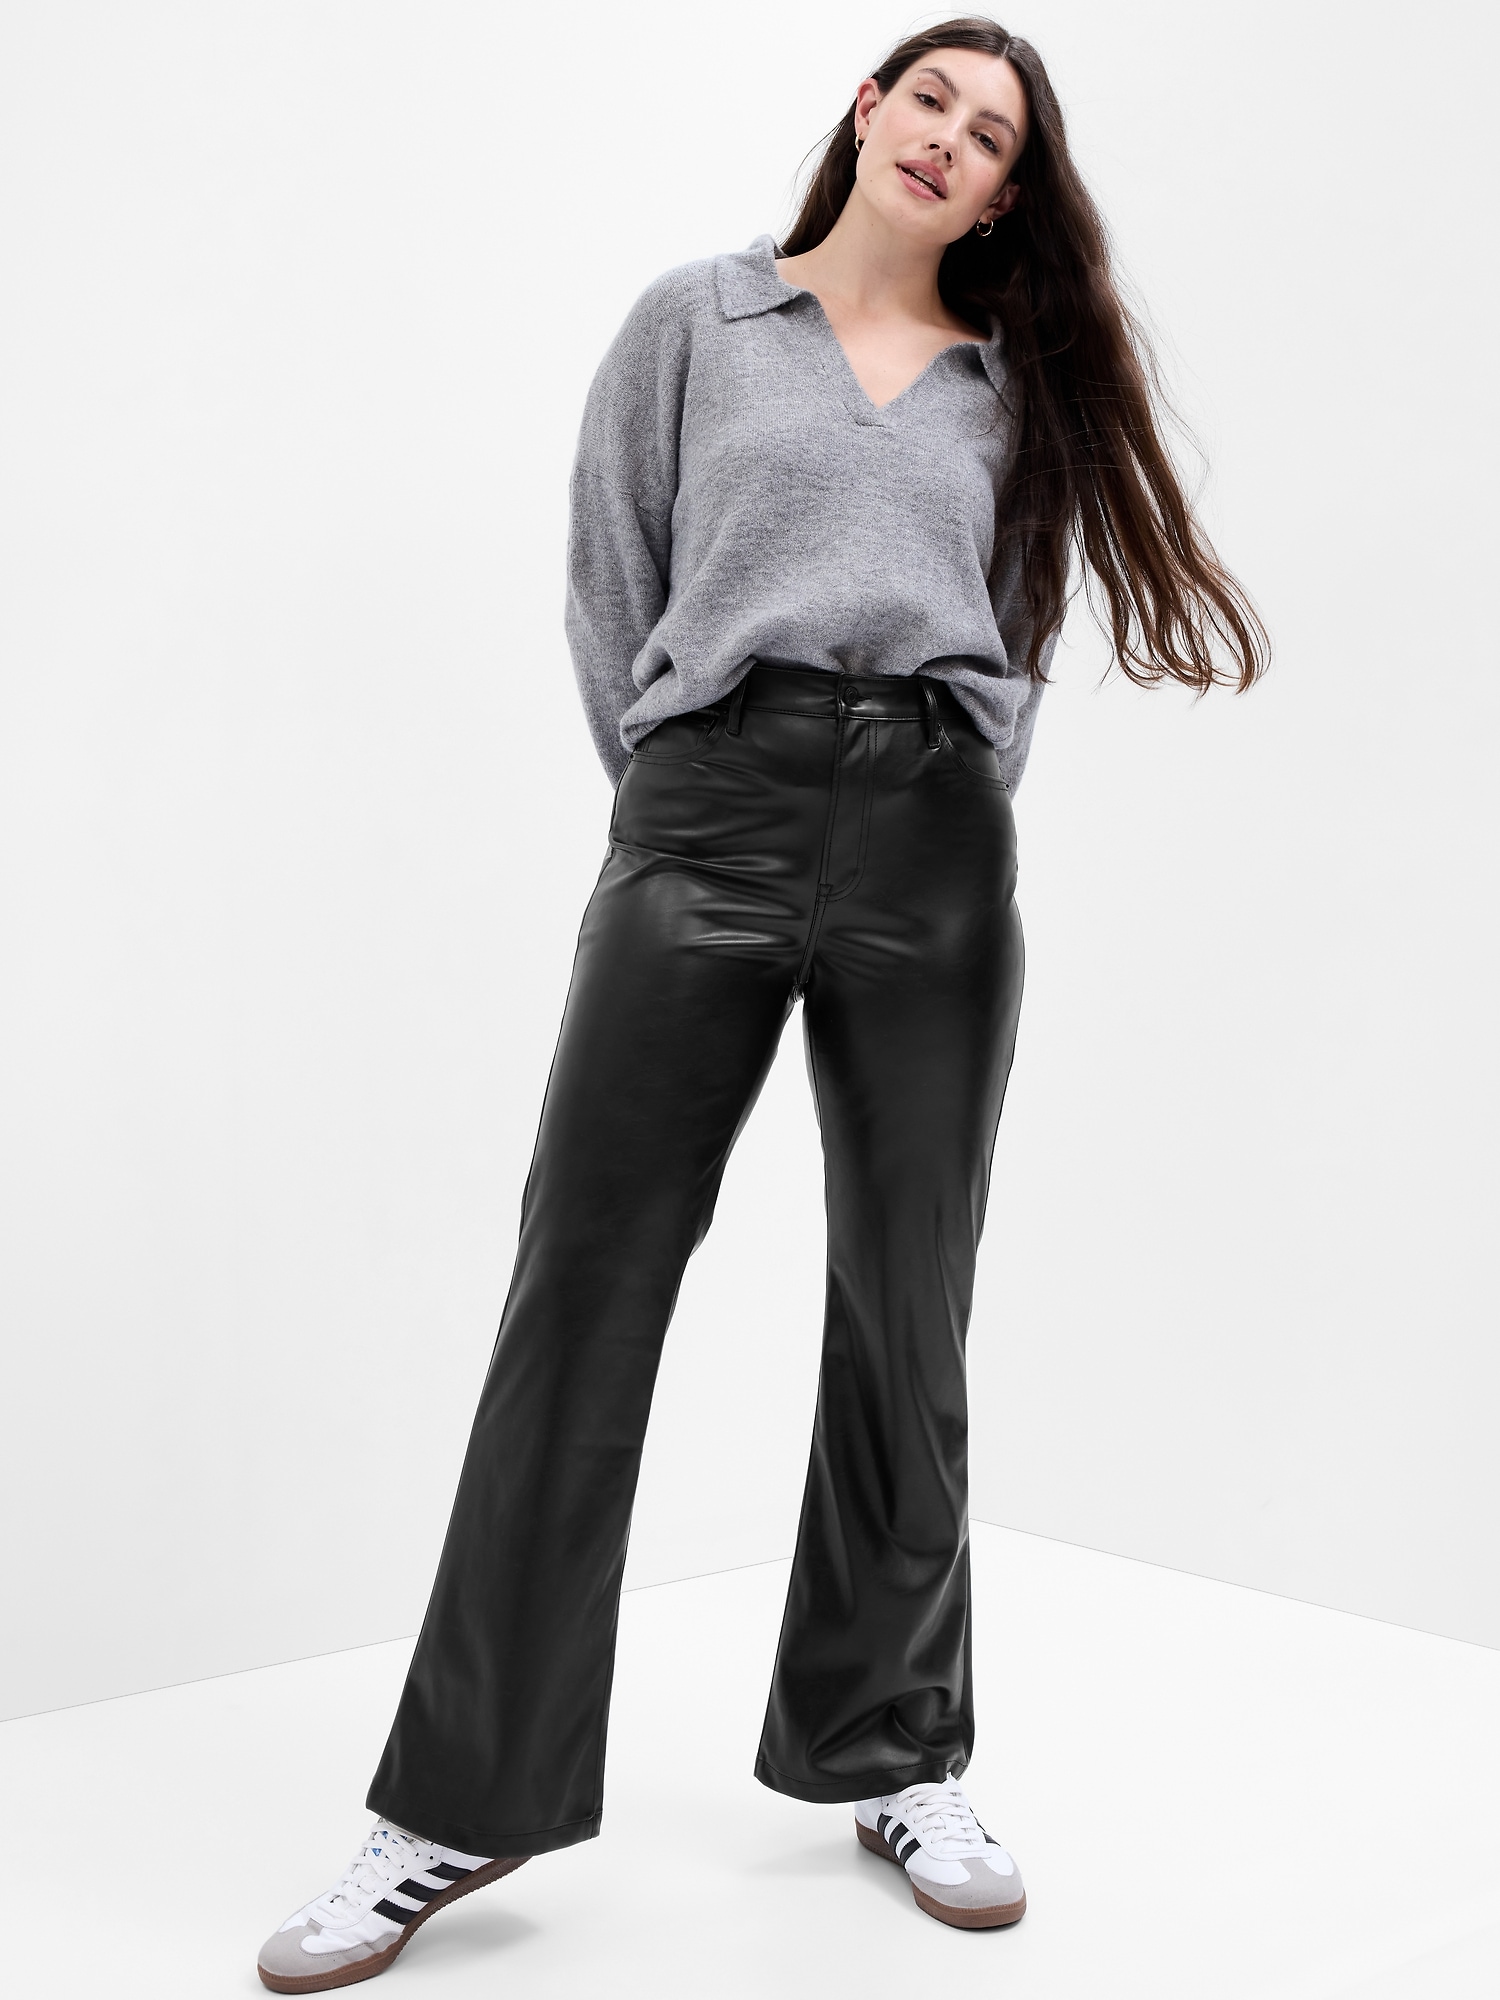 Ginasy Faux Leather Bell Bottom Pants for Women Flare Trousers High Waist  Bootcut Pleather Slacks with Pockets Black at  Women's Clothing store